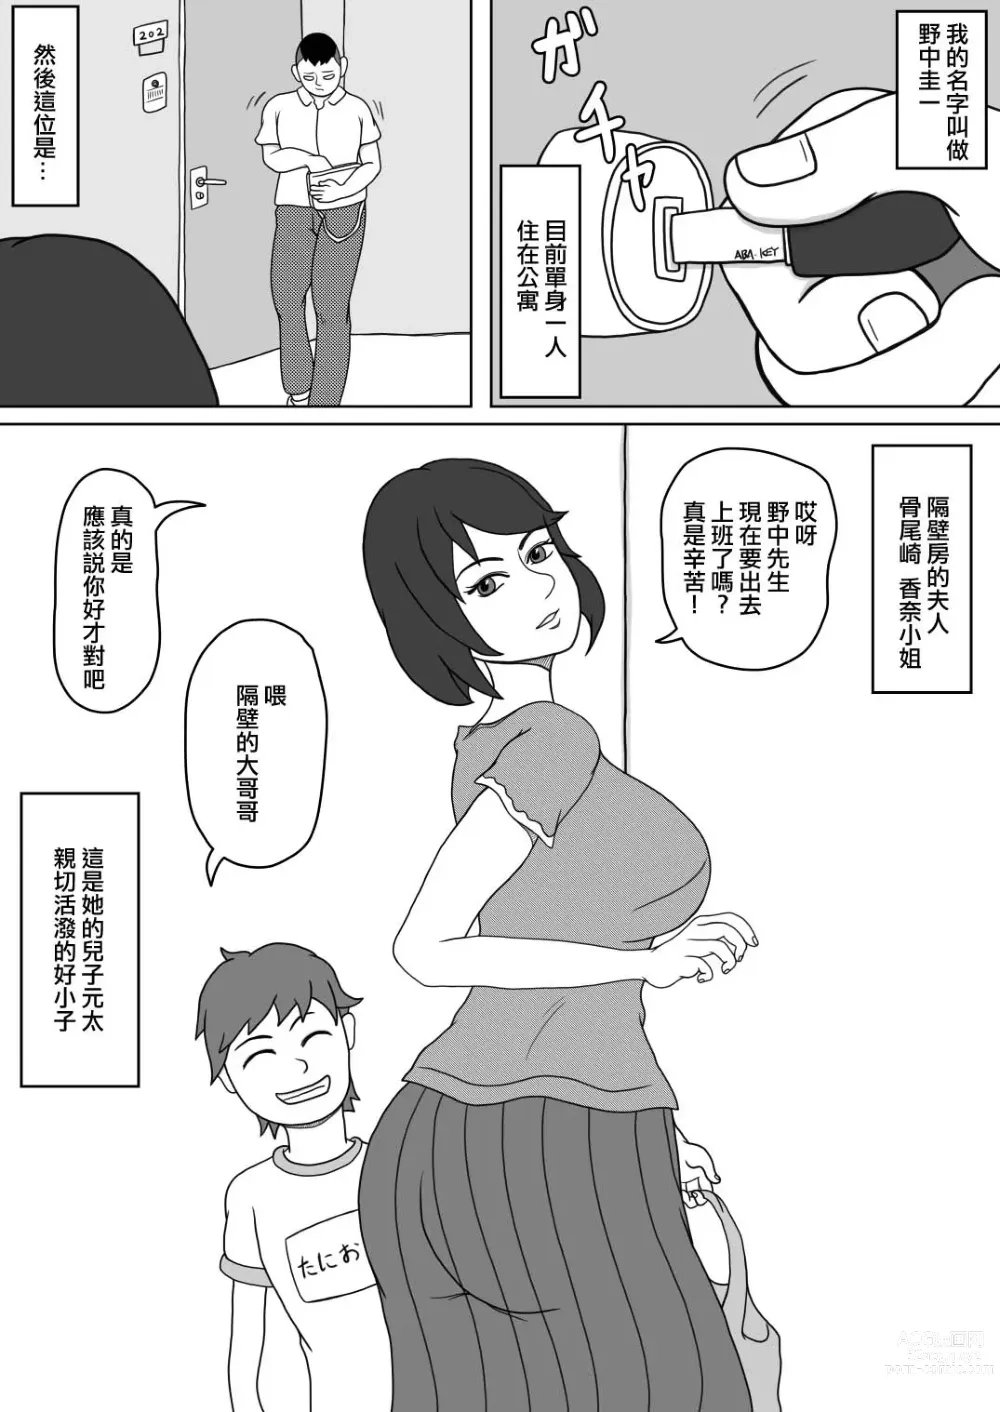 Page 2 of doujinshi 201號房的鄰居